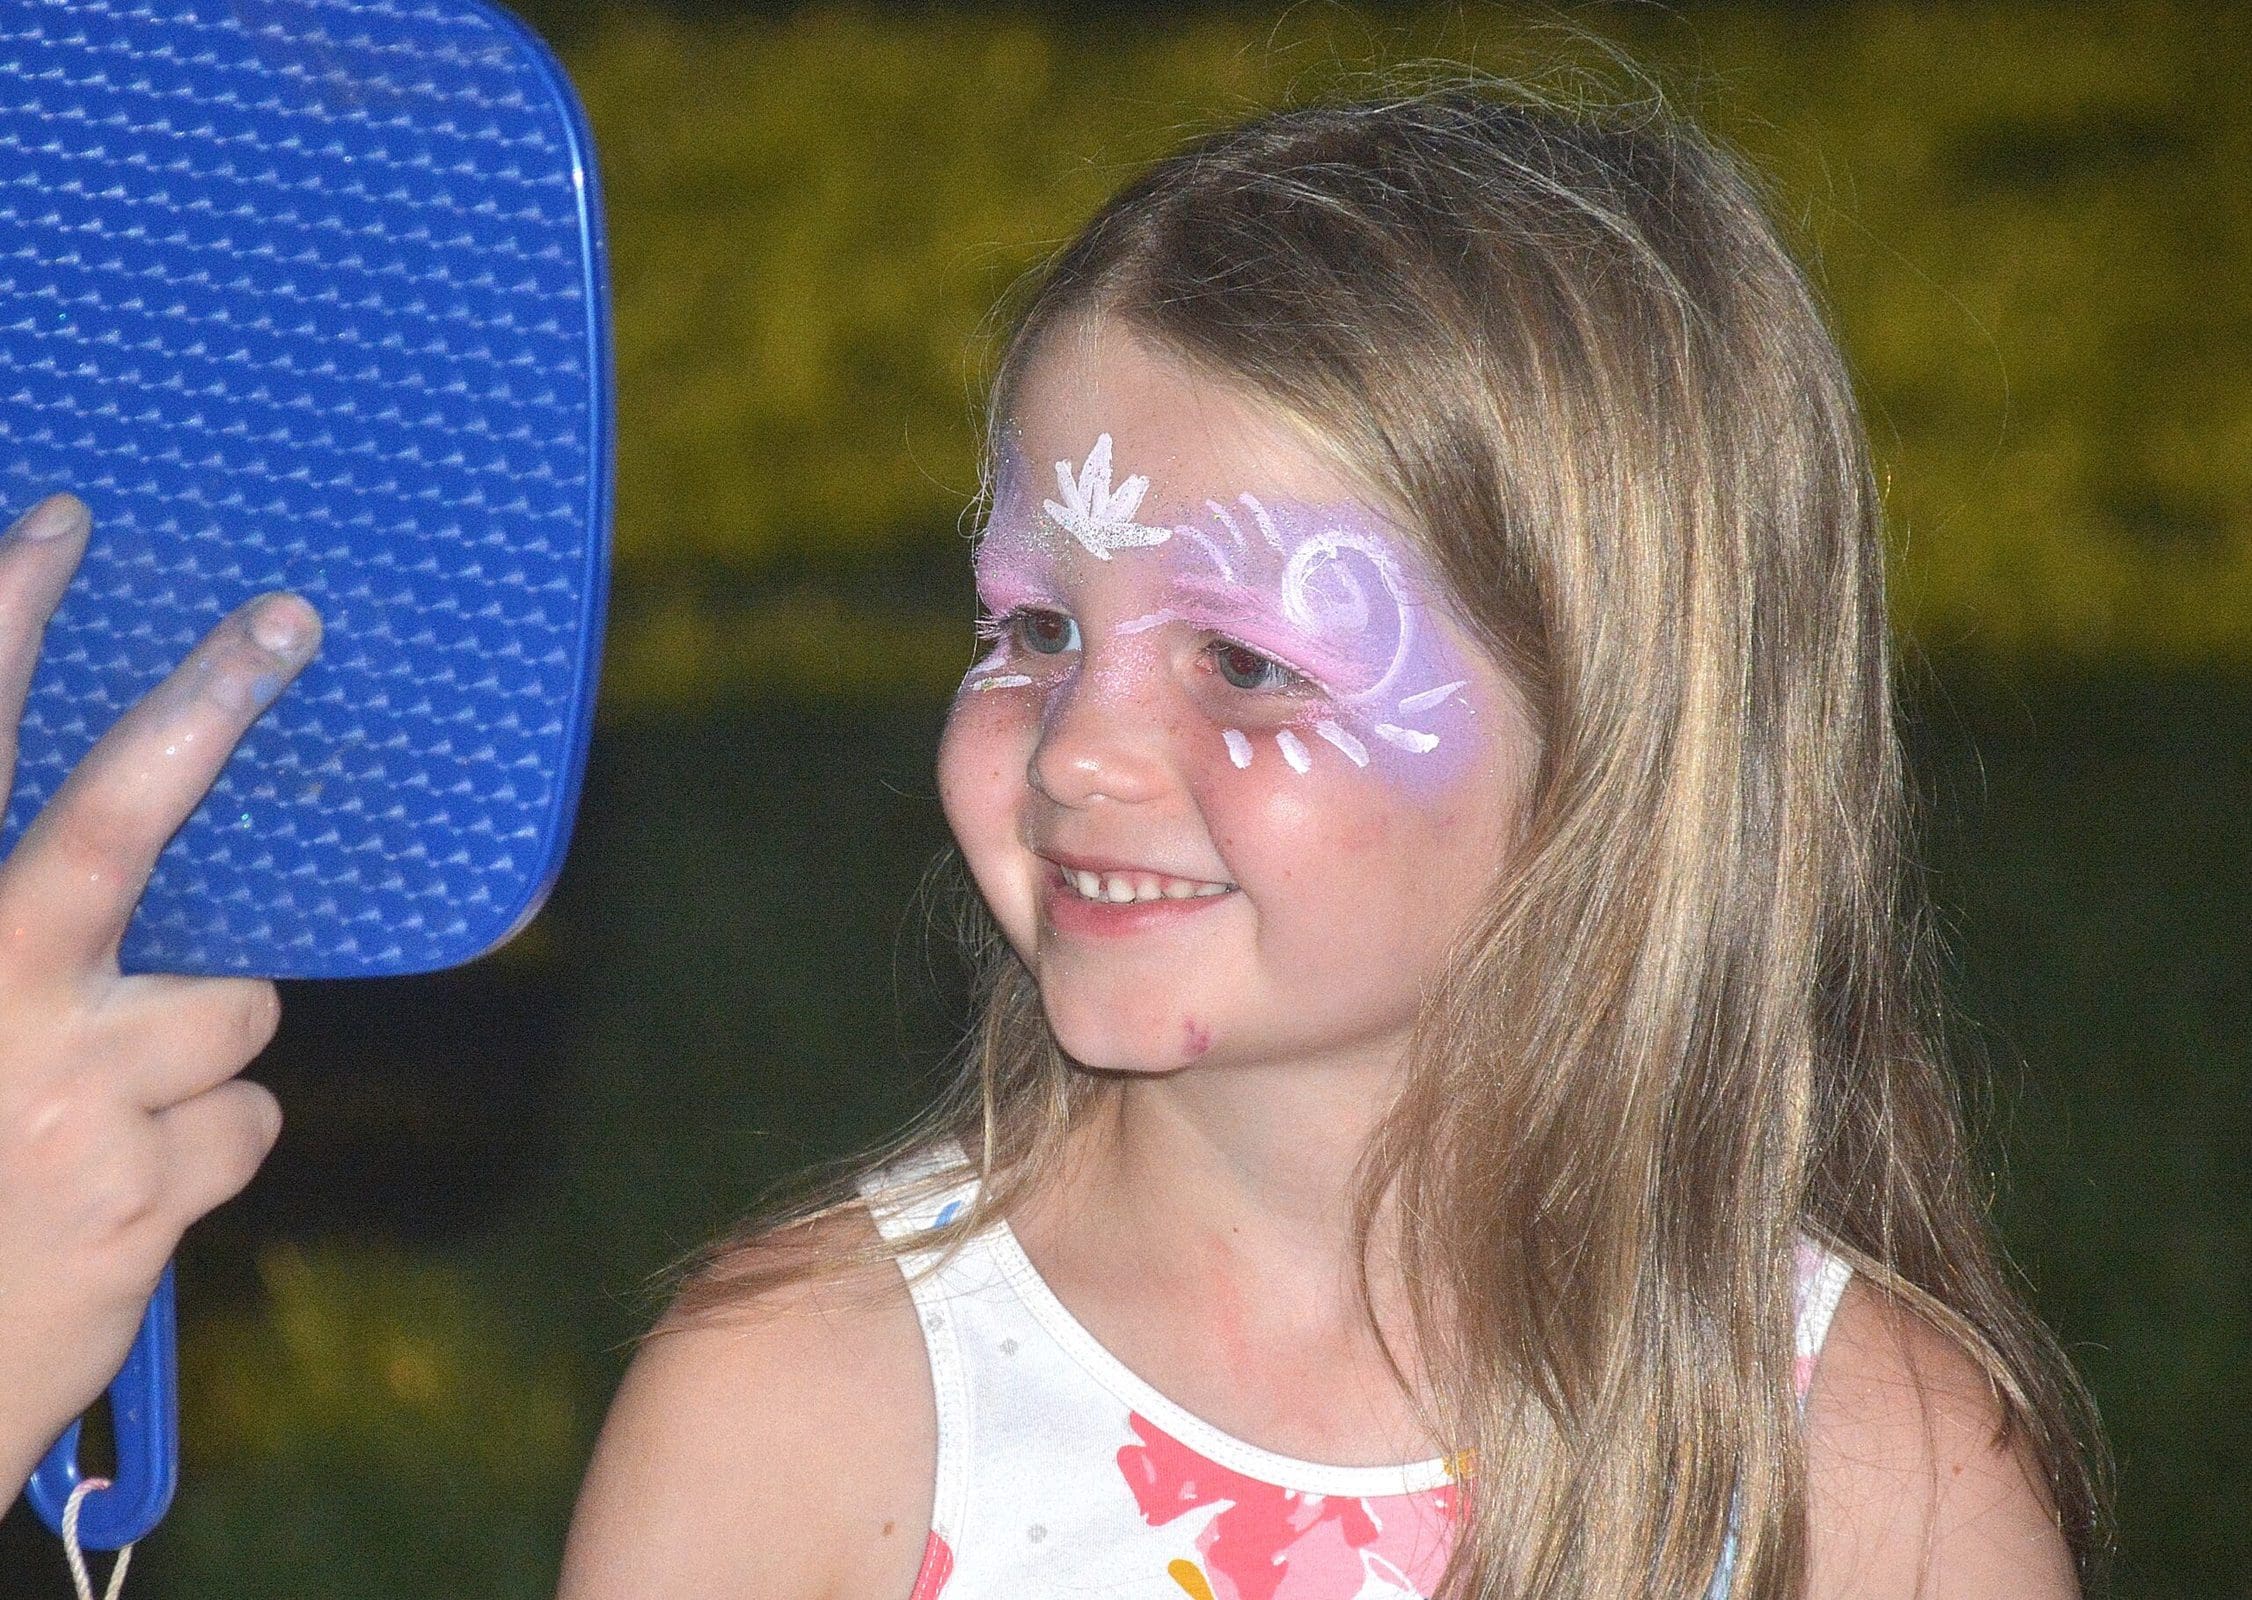 Westborough welcomes back the town’s block party